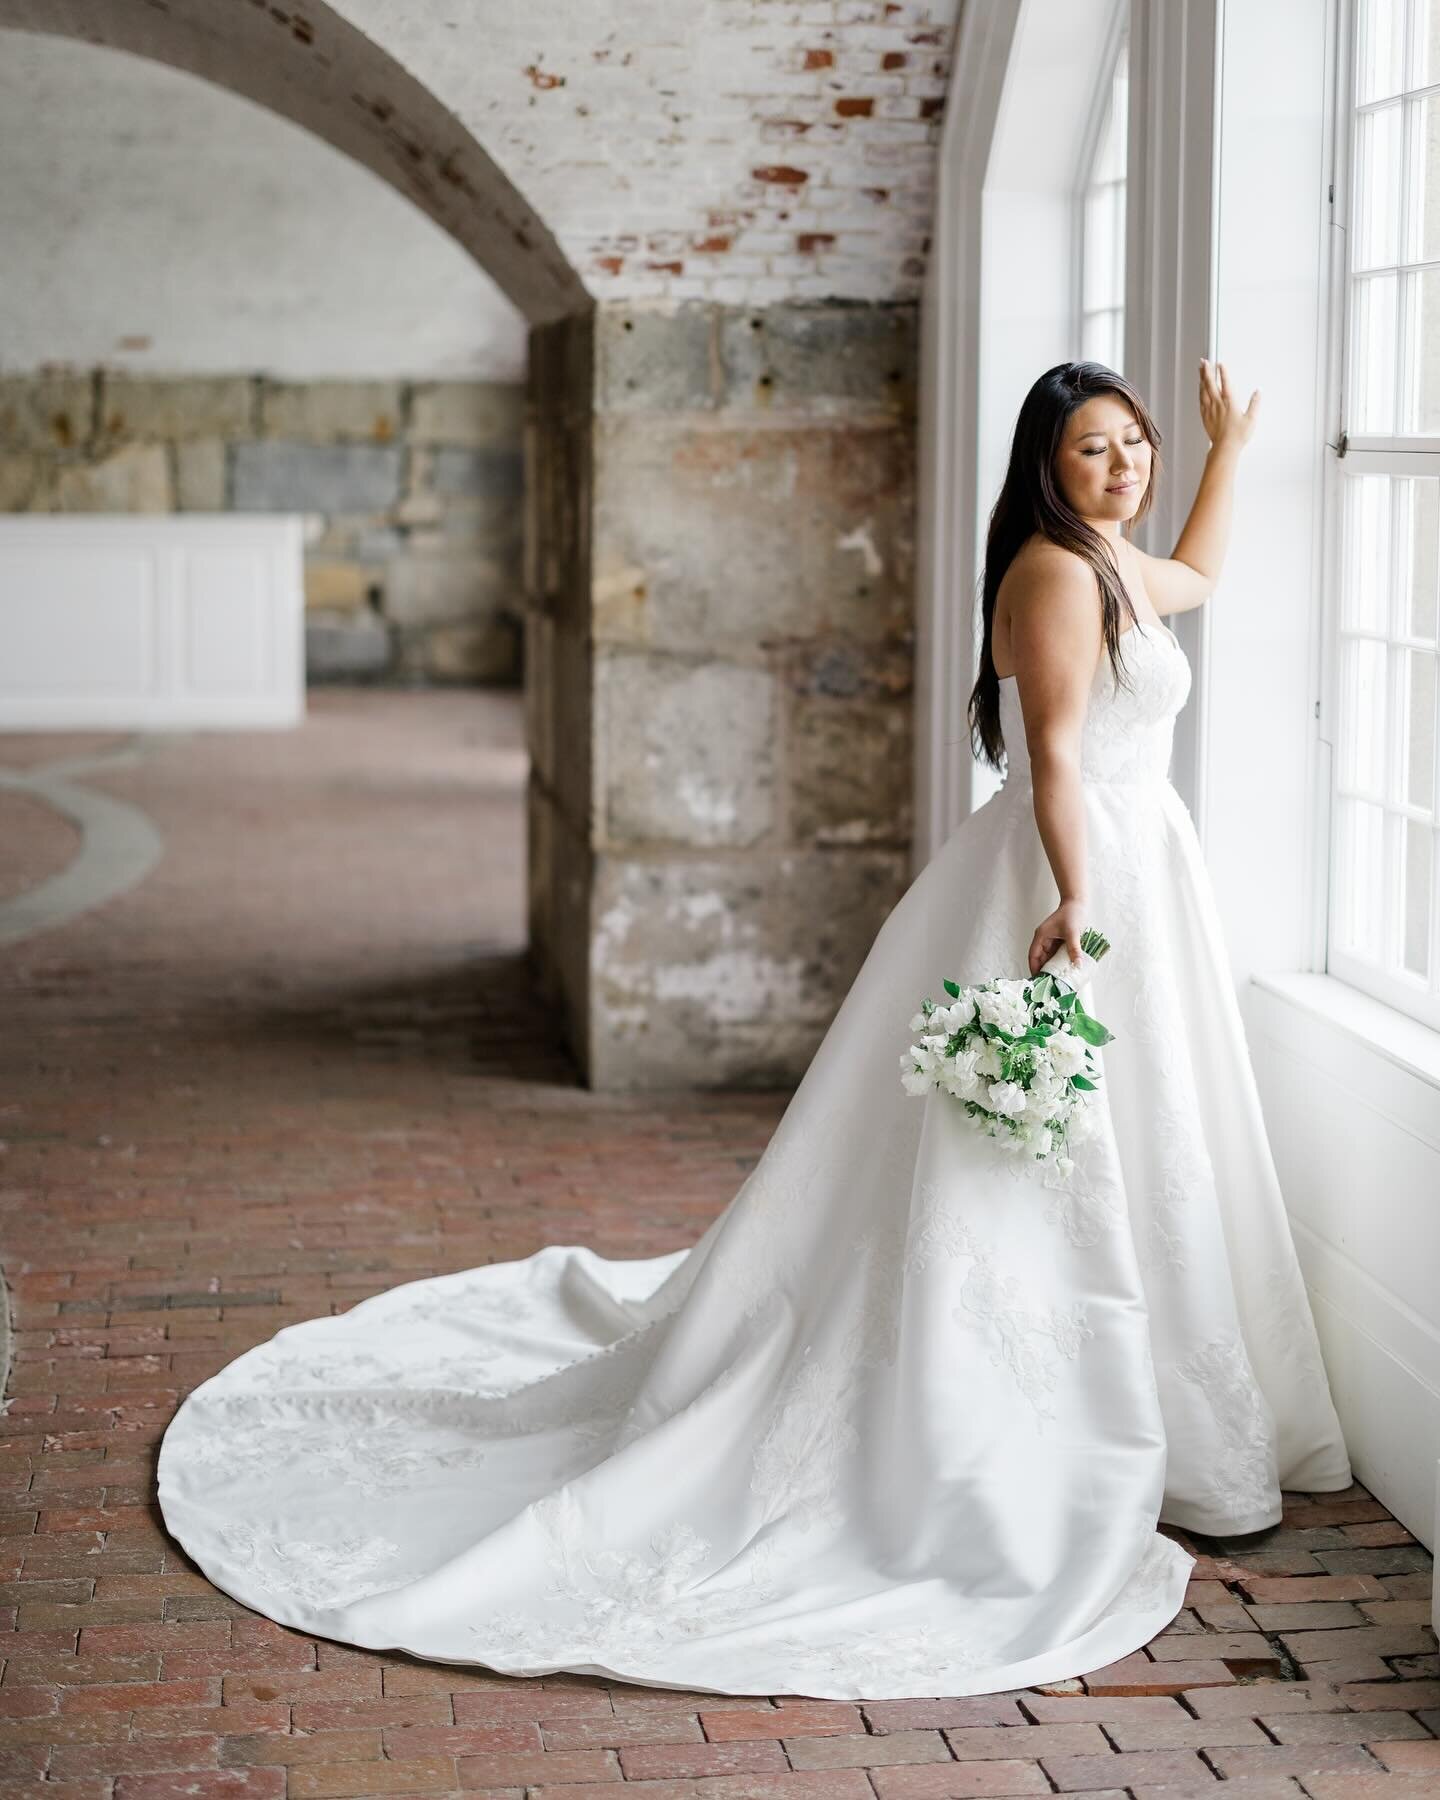 Lee looking stunning at Fort Adams in Newport. The rainy day backup plan ended up with some of our favorite portraits from the day ✨
.
.
.
.
.
Bride: @lee.pk.mayer 
Planner: @marreroevents 
Venue: @newport_mansionsevents @fortadamsevents 
Bridal styl